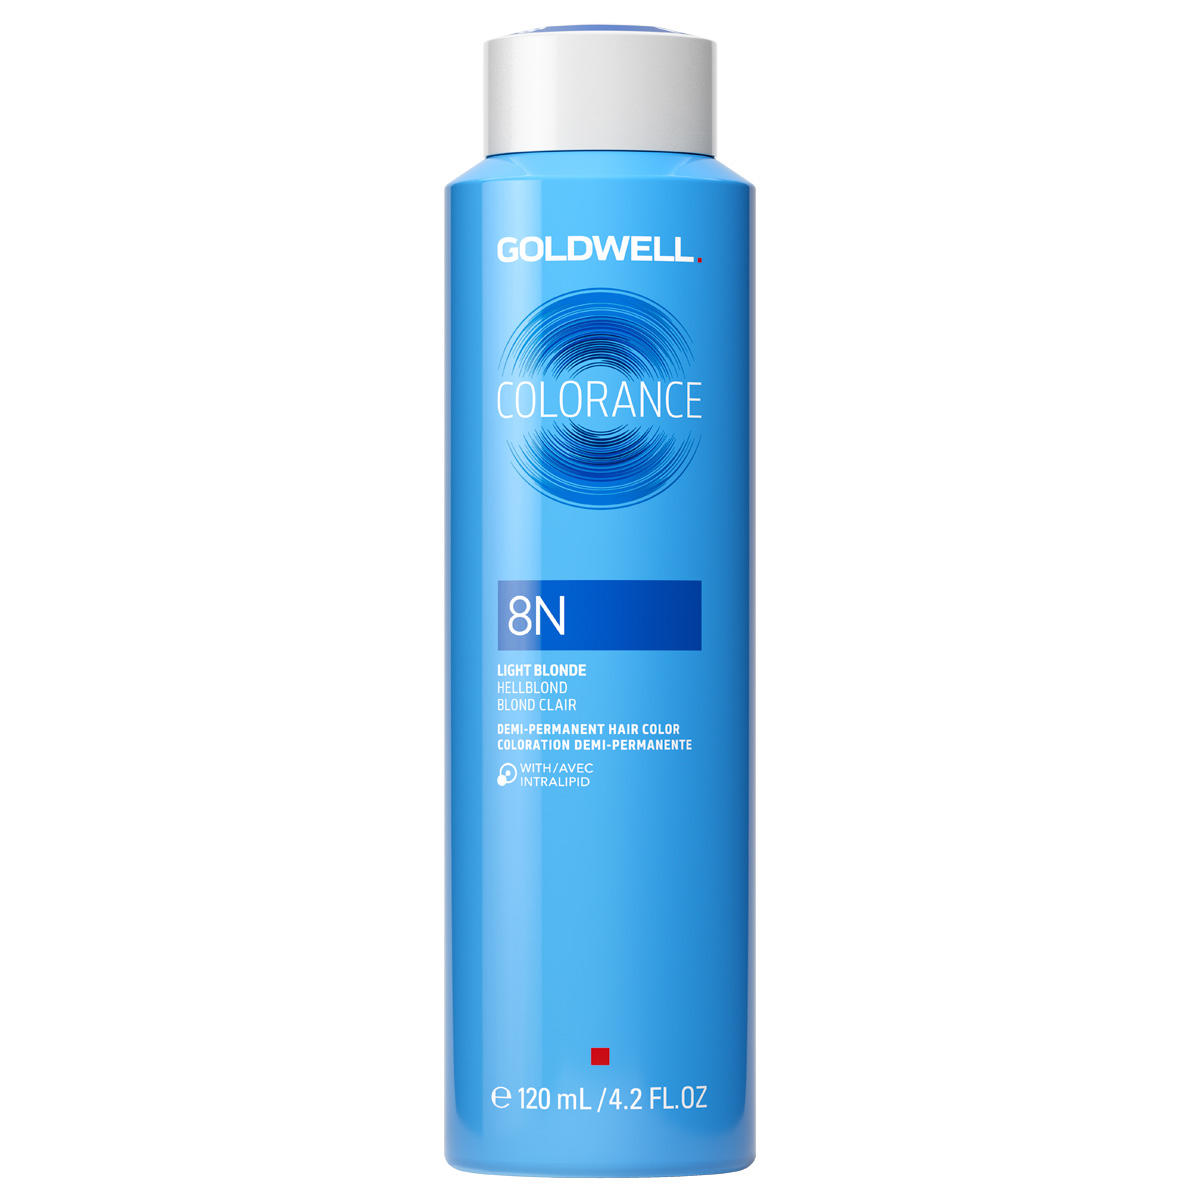 Goldwell Colorance Demi-Permanent Hair Color 8N Light blonde 120 ml - 1